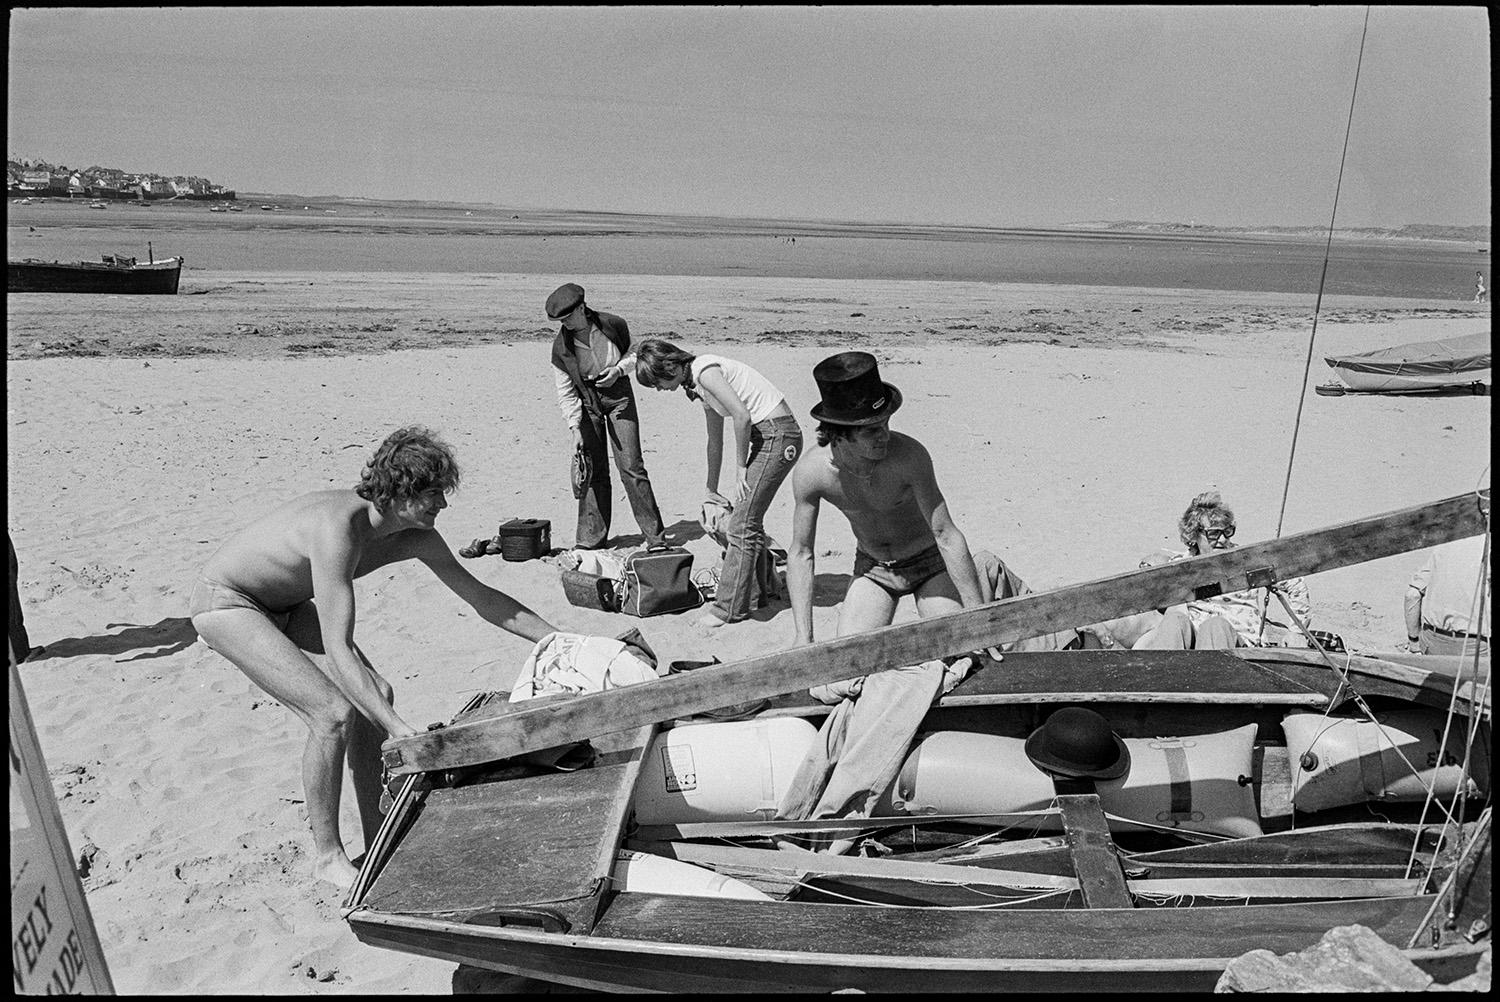 Holidaymakers, sailing boat. 
[Men moving a small boat on Instow beach. One of the men is wearing a top hat. A woman and other holidaymakers can be seen in the background.]